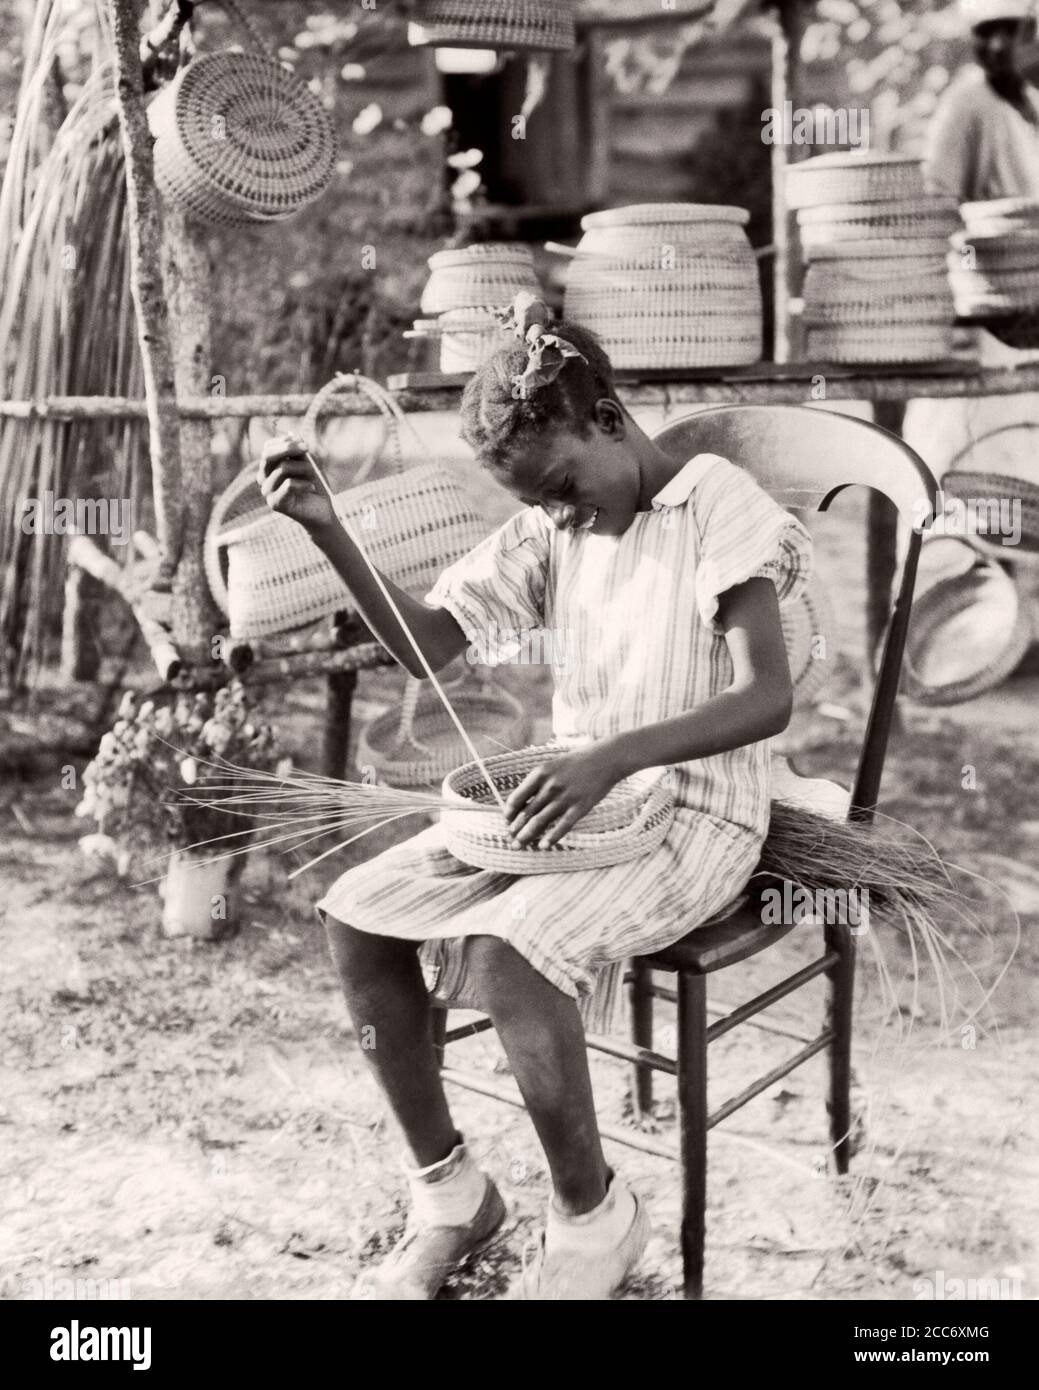 1930s 1940s ANONYMOUS SMILING YOUNG AFRICAN-AMERICAN GULLAH GIRL WEAVING MAKING BASKET FROM SWEETGRASS SOUTH CAROLINA USA - n1204 HAR001 HARS NOSTALGIA OLD FASHION 1 JUVENILE CAREER LIFESTYLE CELEBRATION FEMALES JOBS RURAL HEALTHINESS HOME LIFE UNITED STATES COPY SPACE FULL-LENGTH HIGHWAY PERSONS INSPIRATION TRADITIONAL UNITED STATES OF AMERICA TEENAGE GIRL PROFESSION CRAFT SPIRITUALITY CONFIDENCE B&W SADNESS NORTH AMERICA NORTH AMERICAN GEORGIA SKILL OCCUPATION HAPPINESS SKILLS LANGUAGE WELLNESS STRENGTH CUSTOMER SERVICE AFRICAN-AMERICANS AFRICAN-AMERICAN CAREERS KNOWLEDGE TOURIST Stock Photo